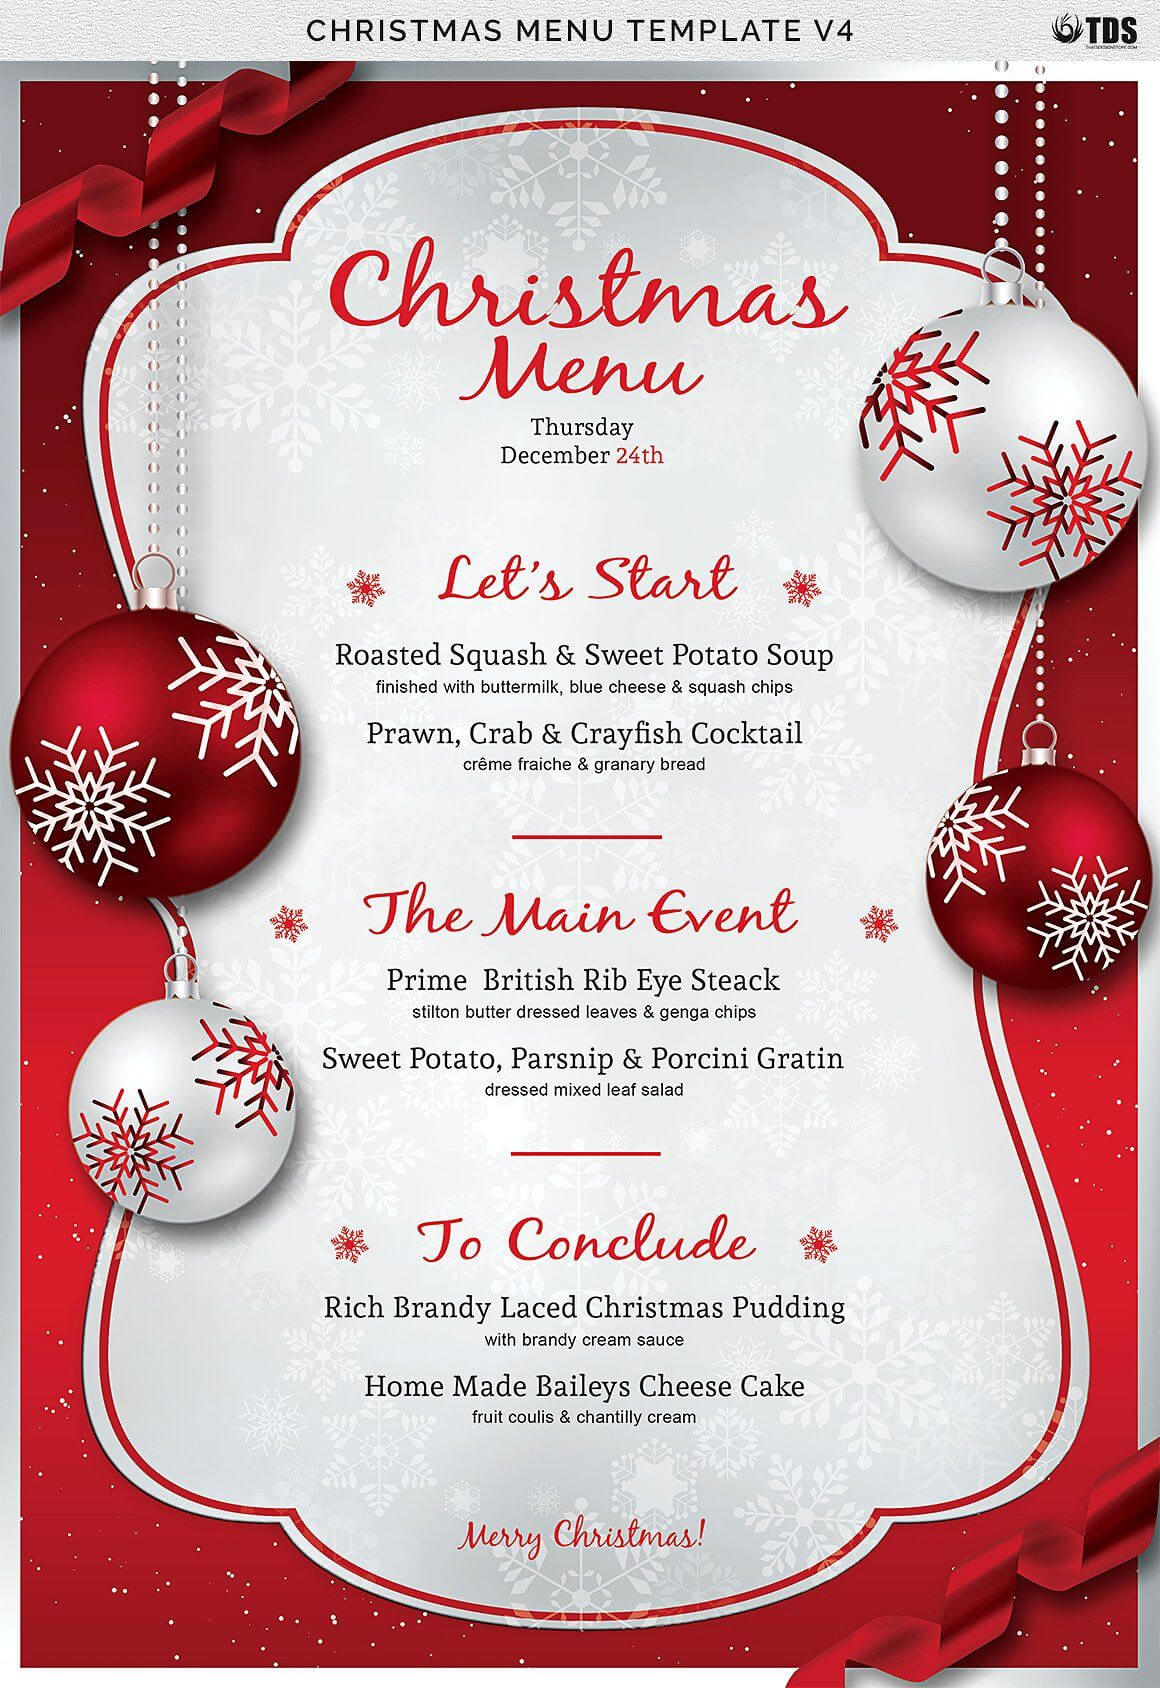 Christmas Menu Template V4 #size#cm#psd#photoshop With Regard To Free Christmas Invitation Templates For Word